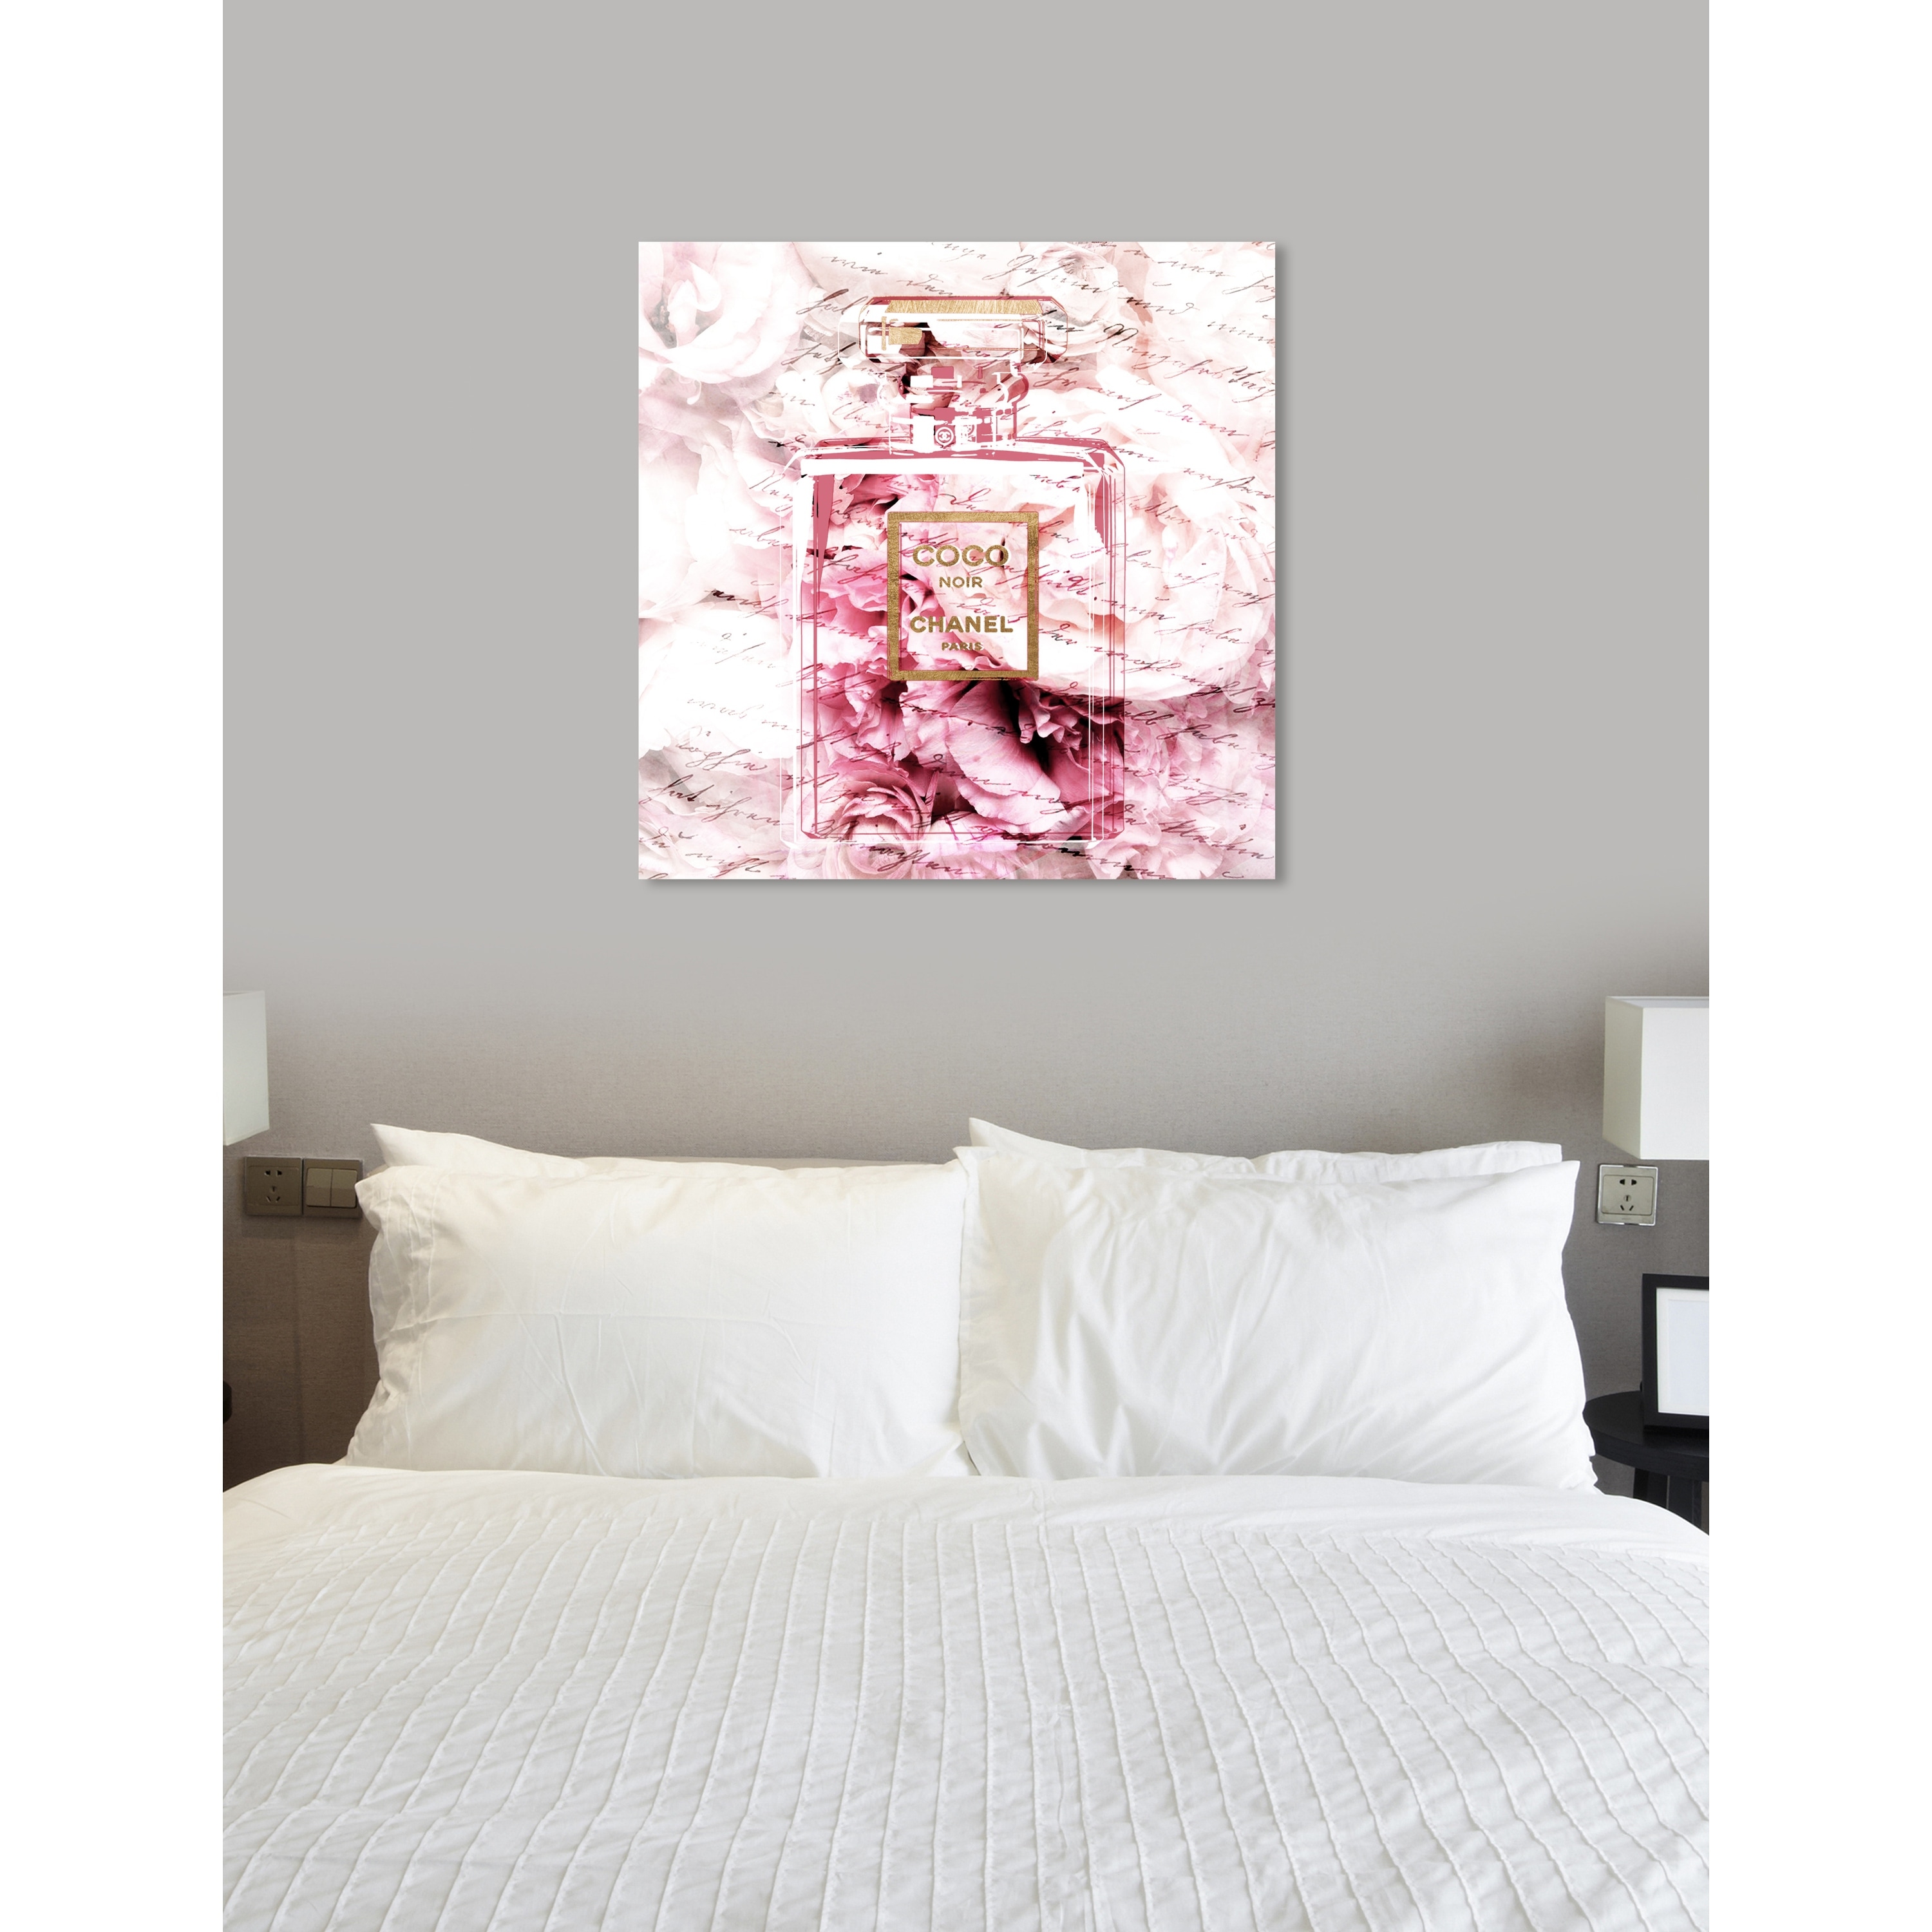 Oliver Gal 'Romantic French Perfume' Fashion and Glam Wall Art